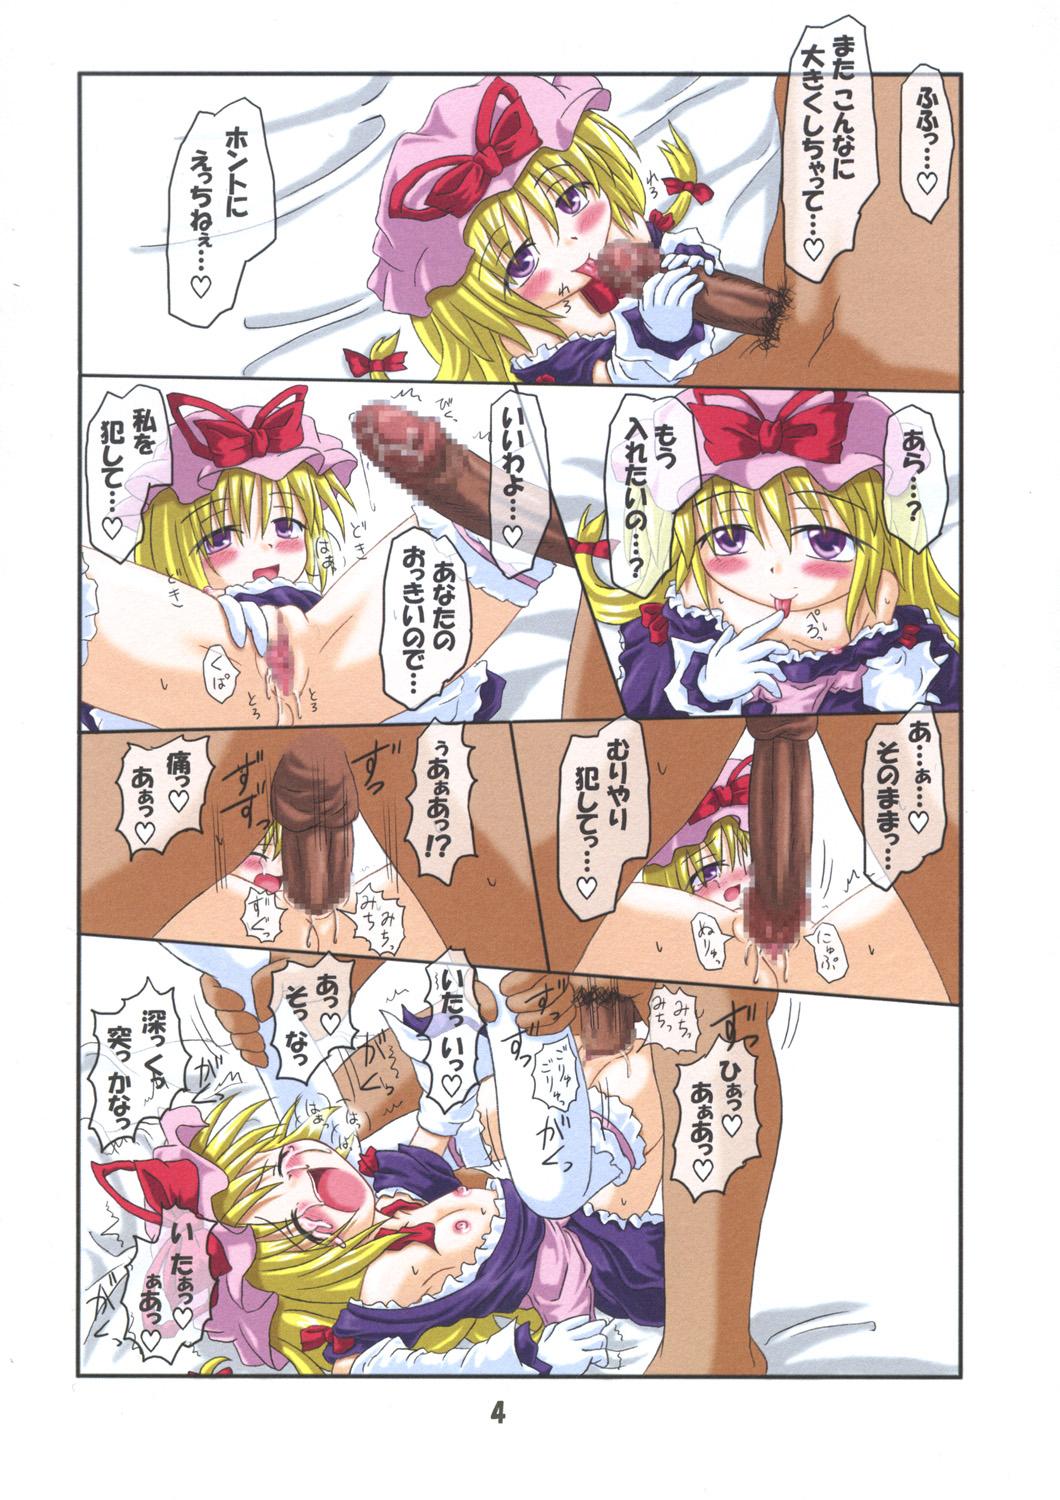 Pain Rollin 17 - Touhou project Compilation - Page 3